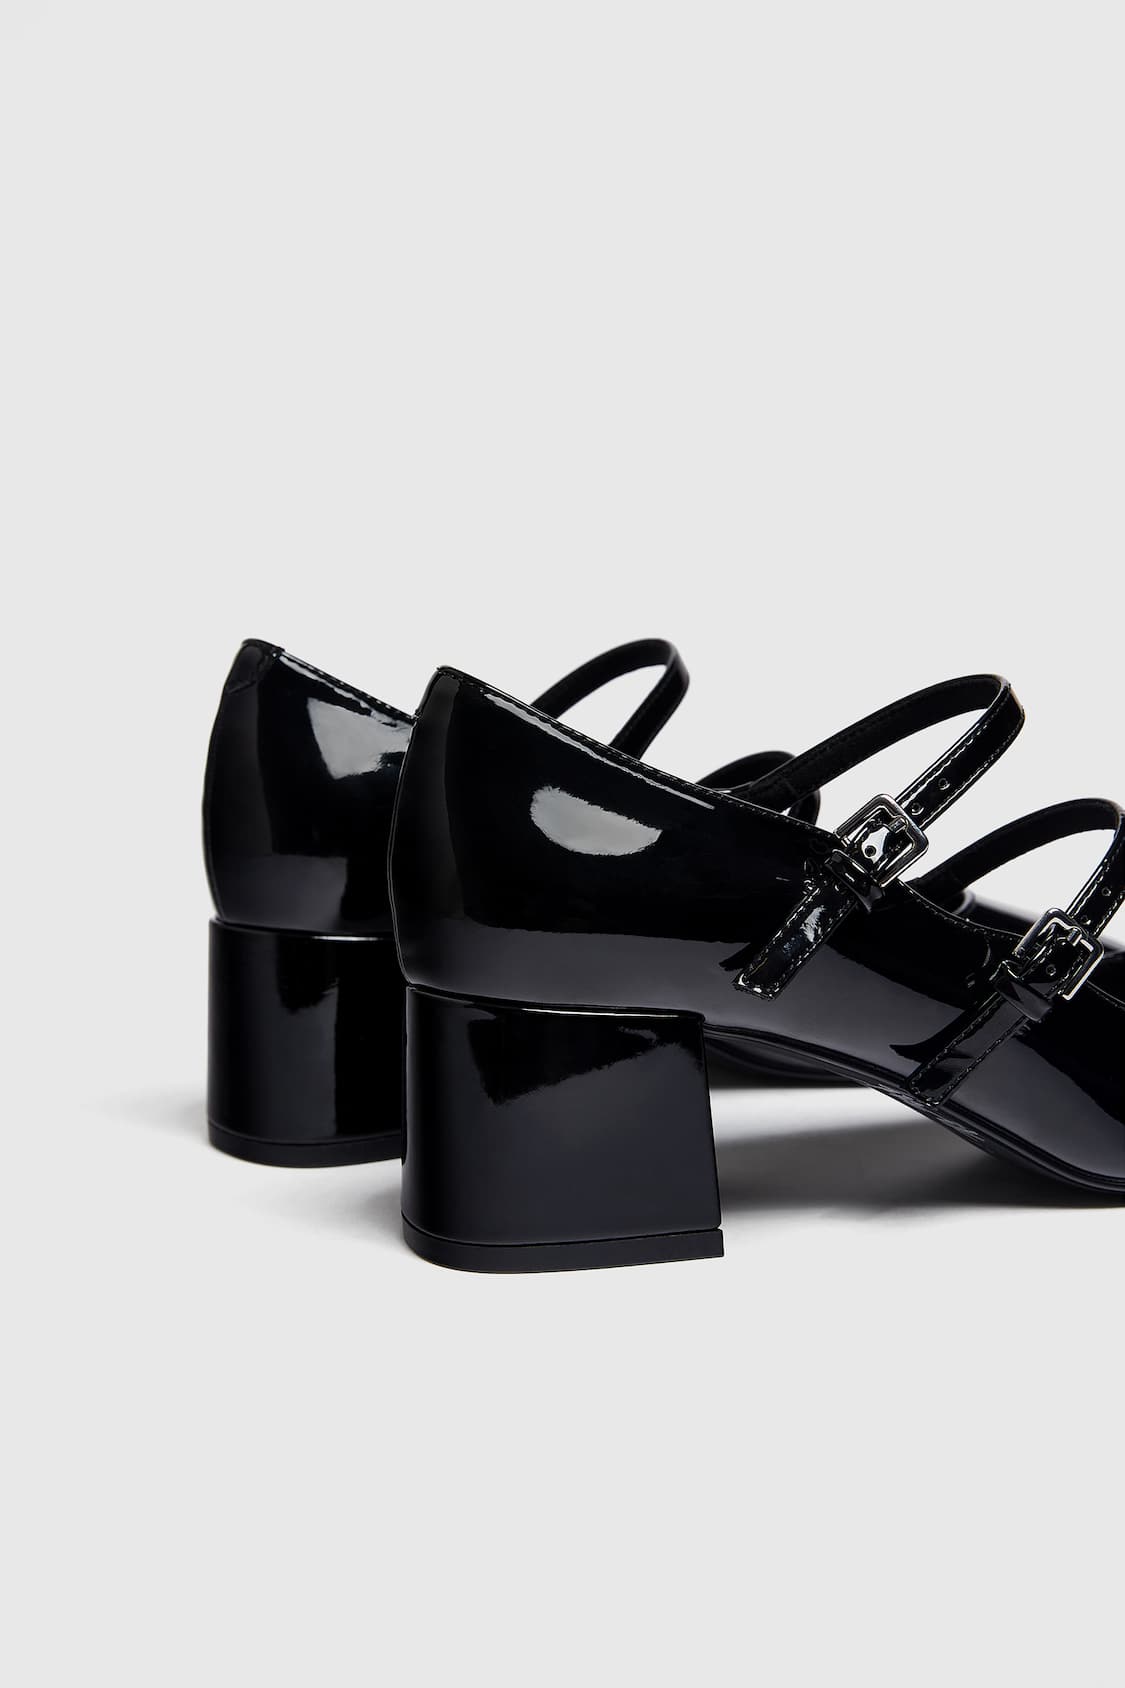 PULL & BEAR PATENT LEATHER MARYJANE SHOES IN BLACK